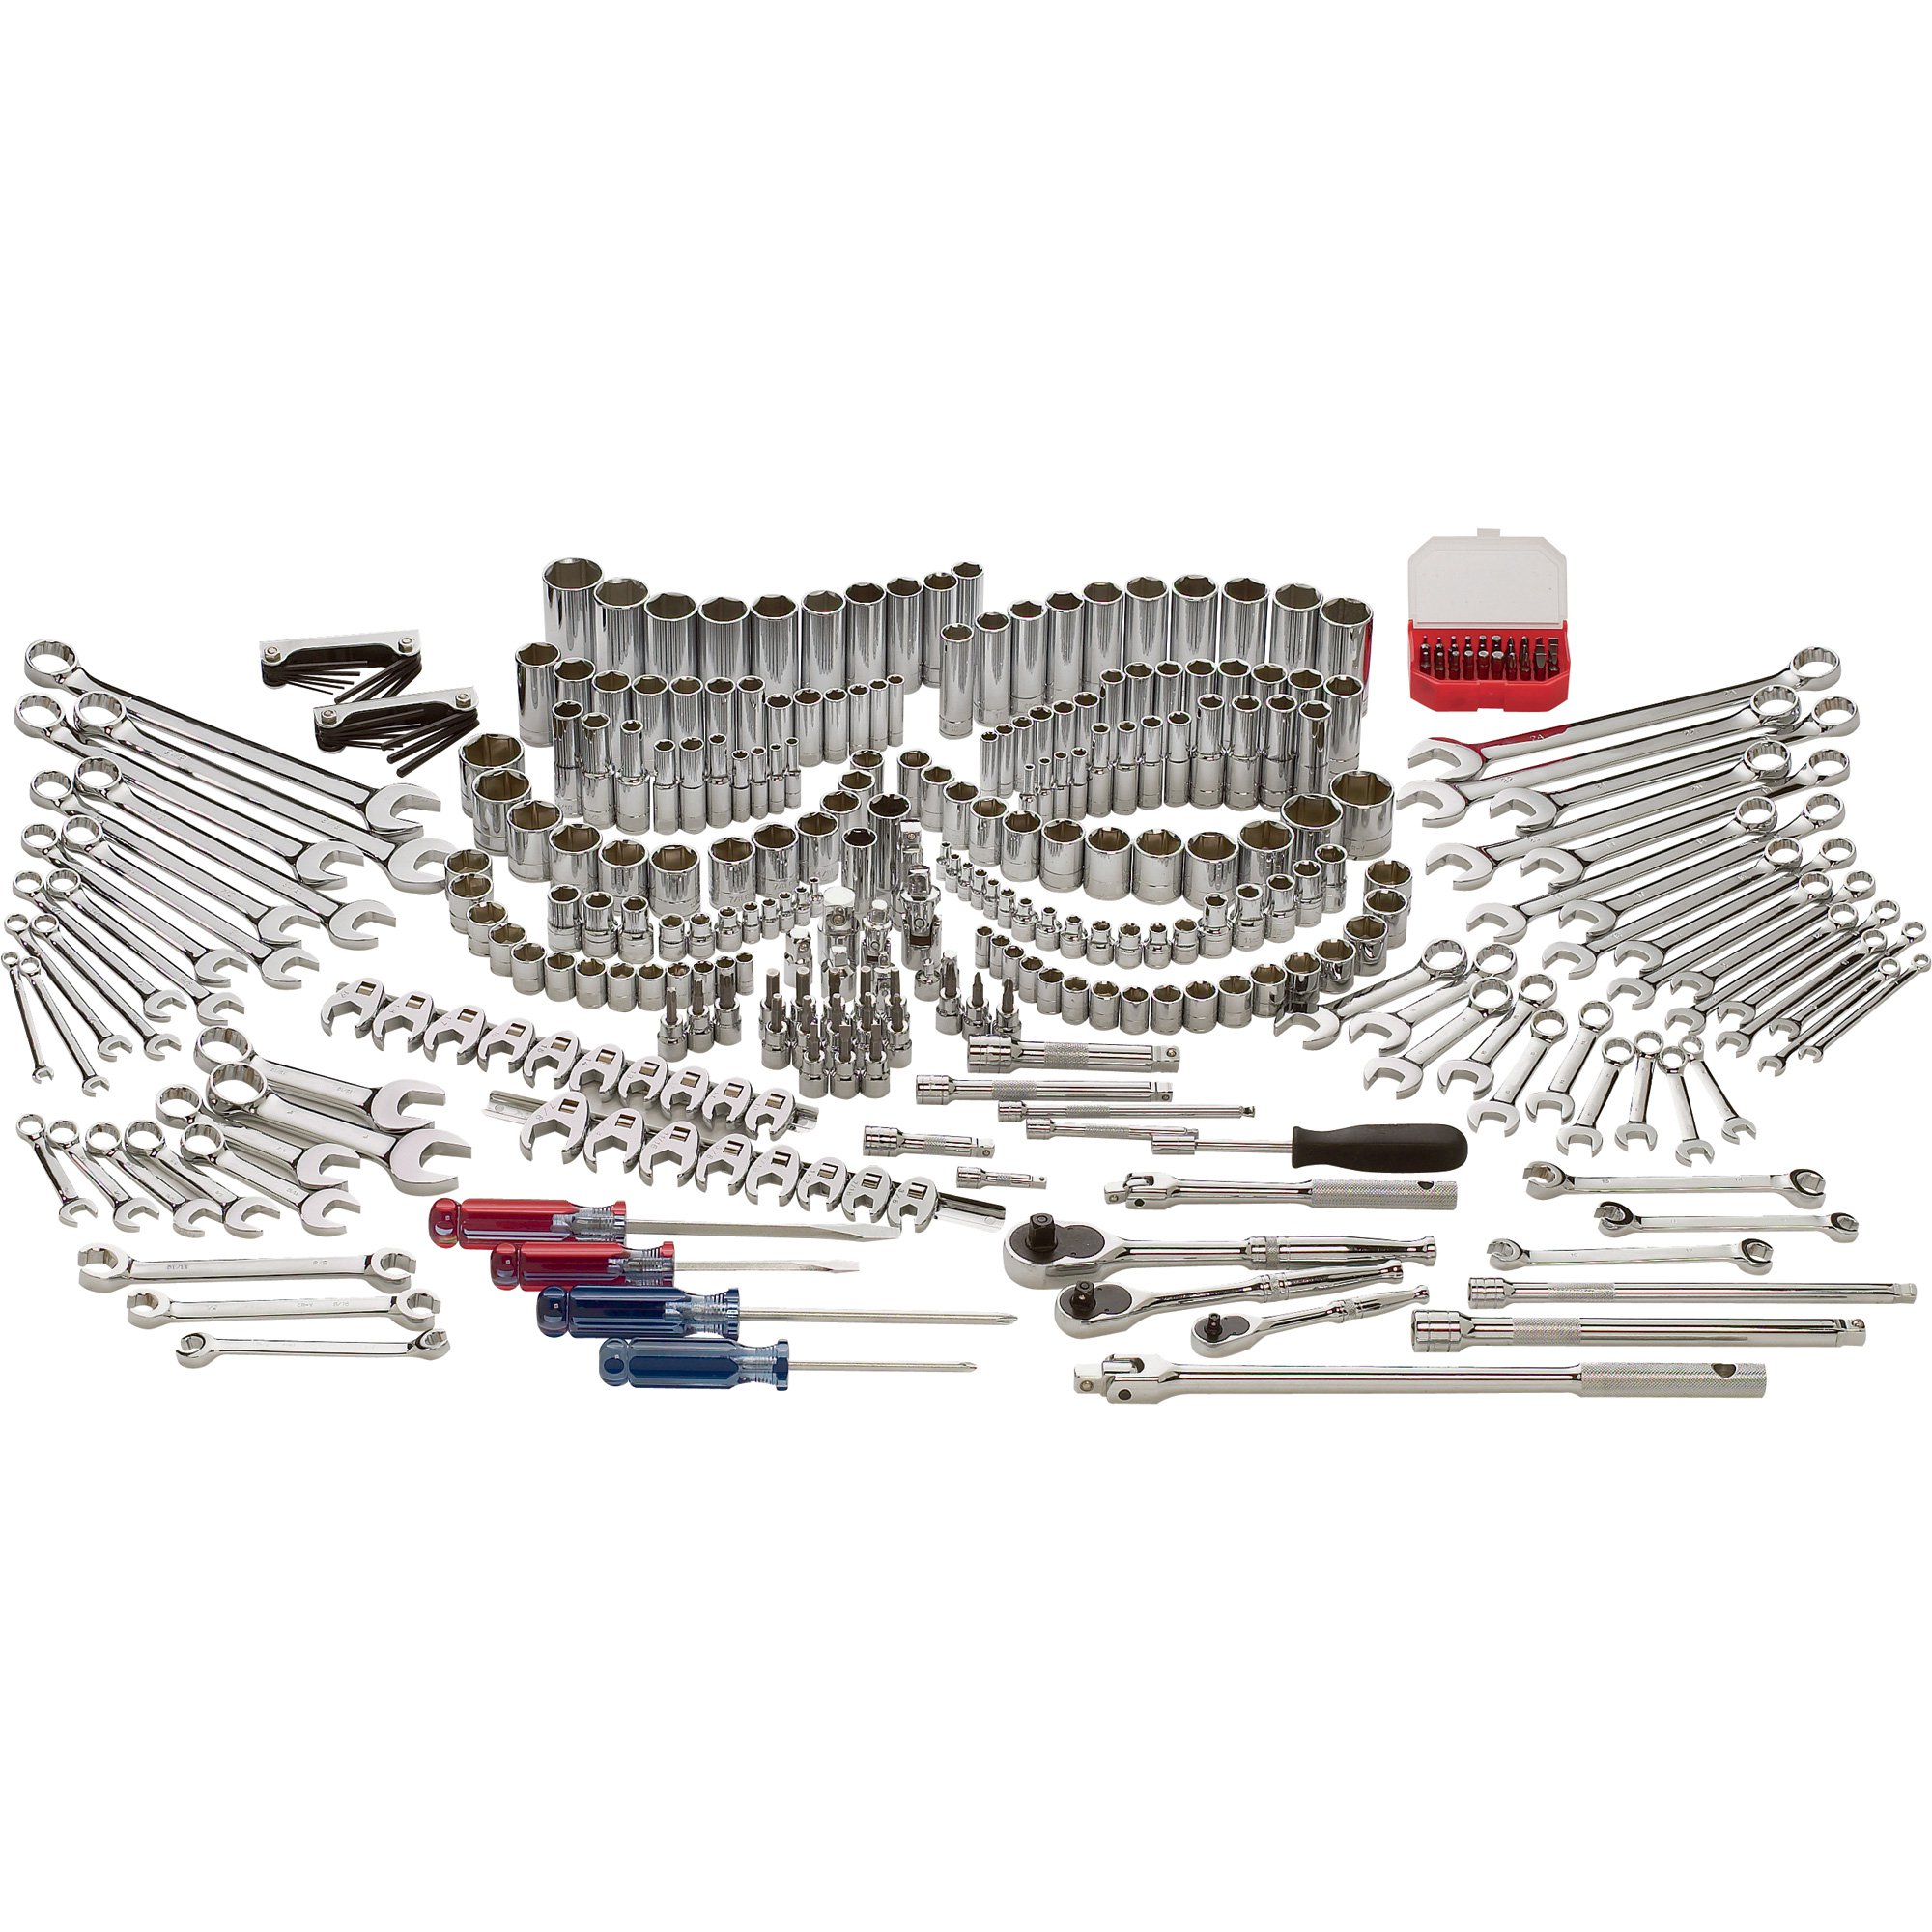 Klutch Mechanic's Tool Set — 305-Pc., 1/4in.-, 3/8in.- and 1/2in